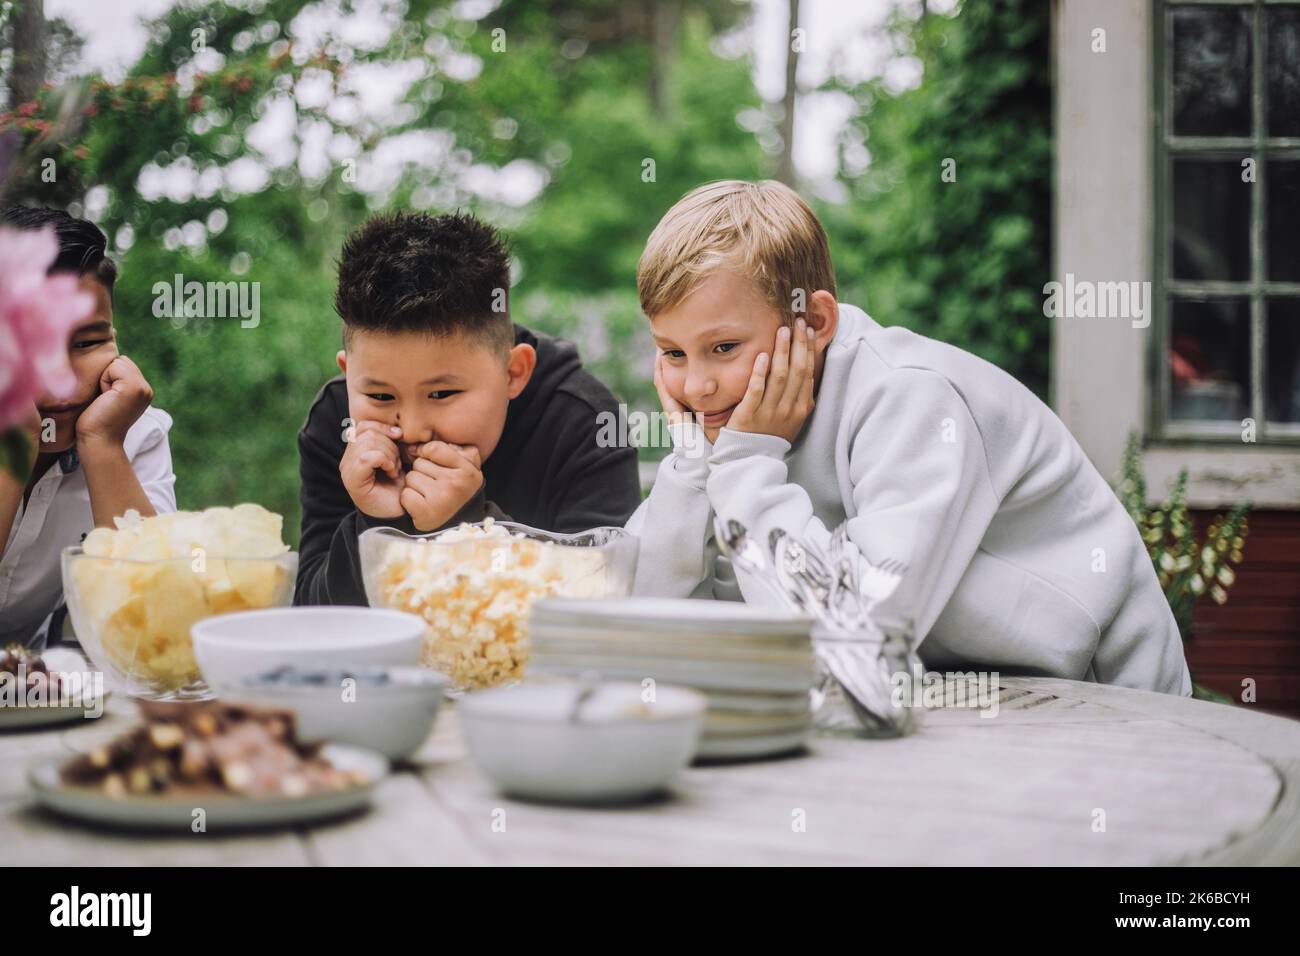 Curious boys leaning on elbows while looking at snacks bowl on table Stock Photo